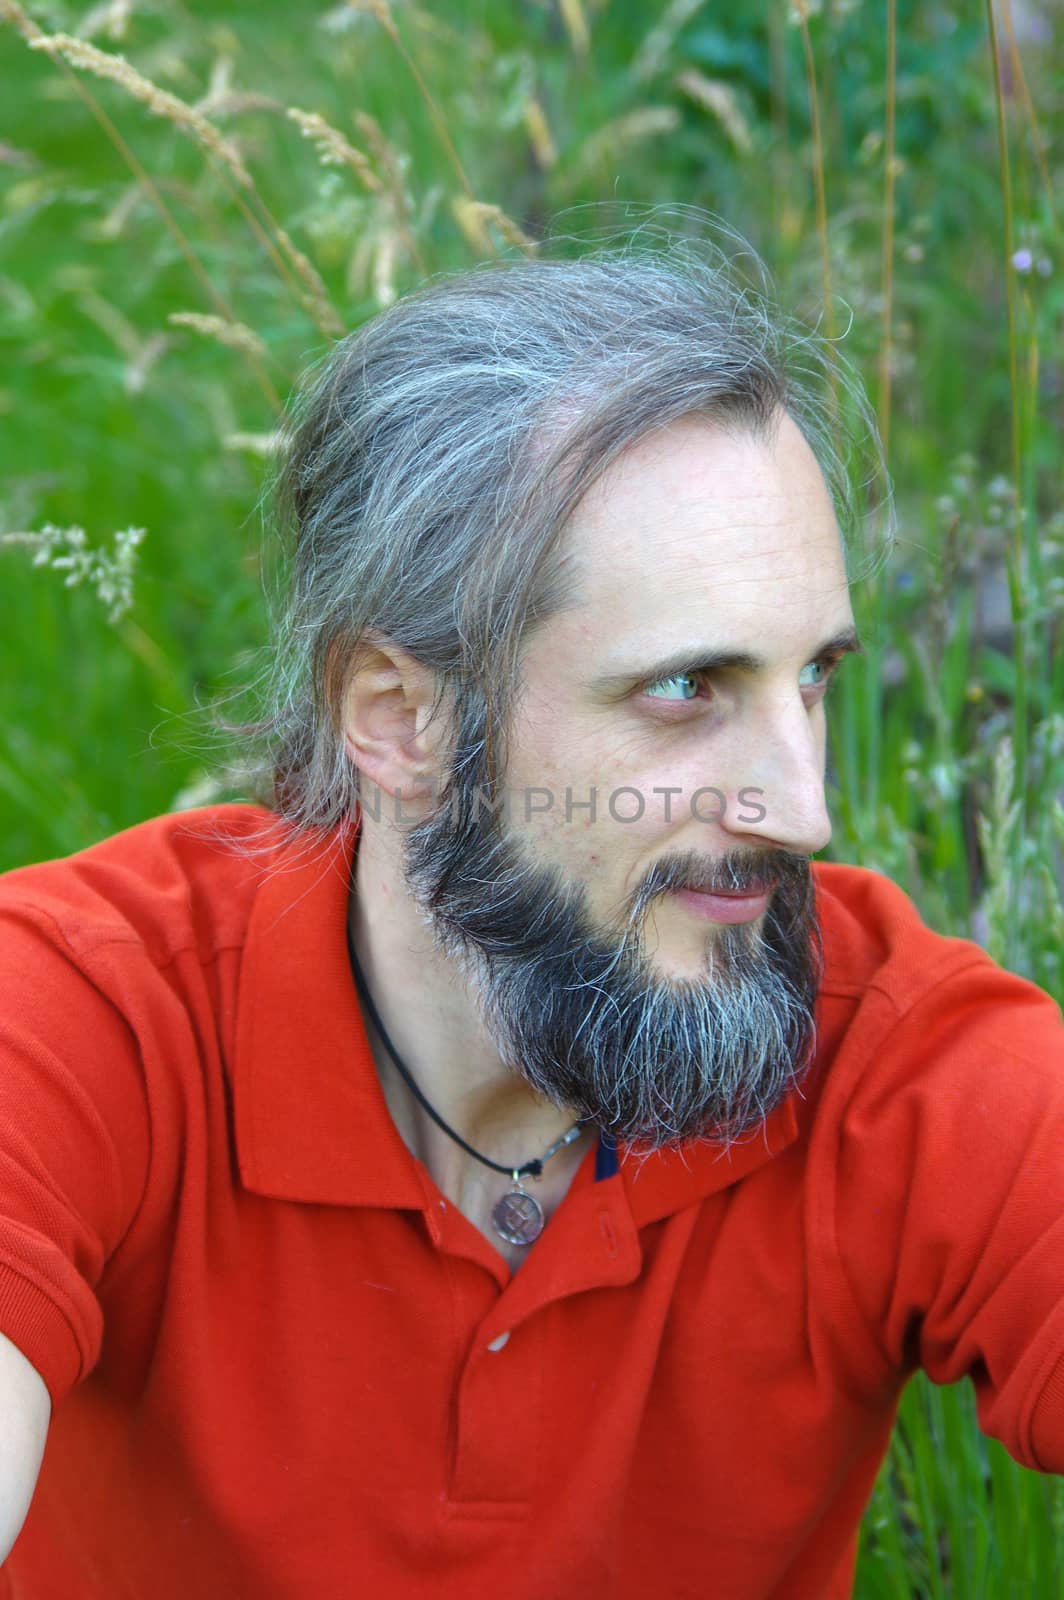 a Young Man - This is a portrait of a young man with a beard sitting out side on a sunny day.